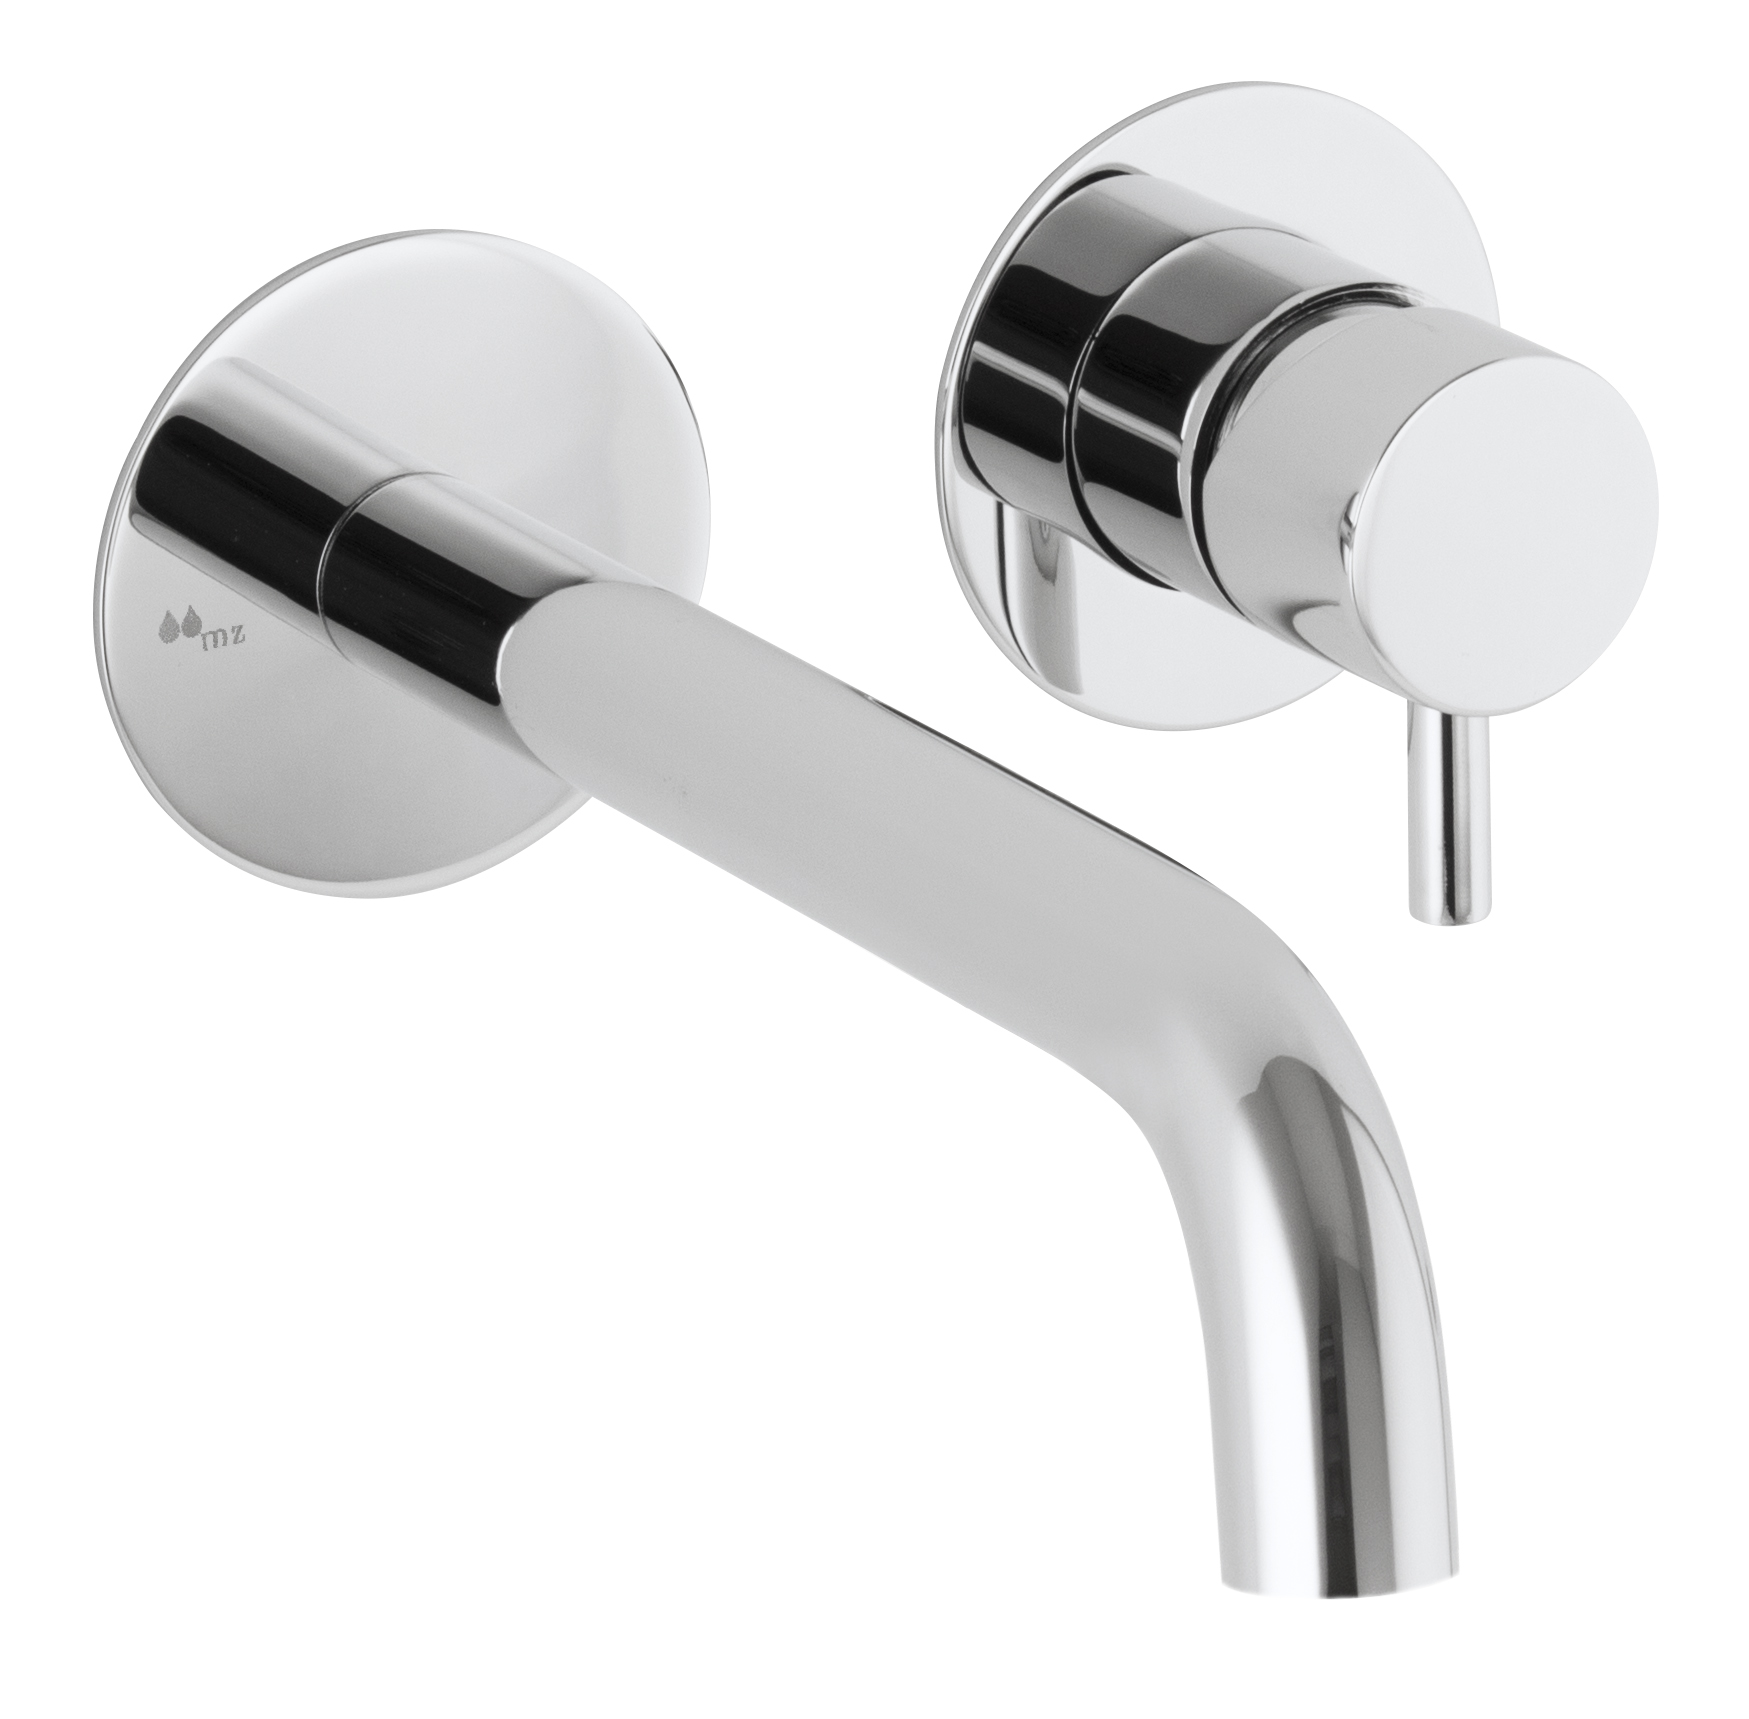 Built-in- Single Lever Faucet | Porcemall